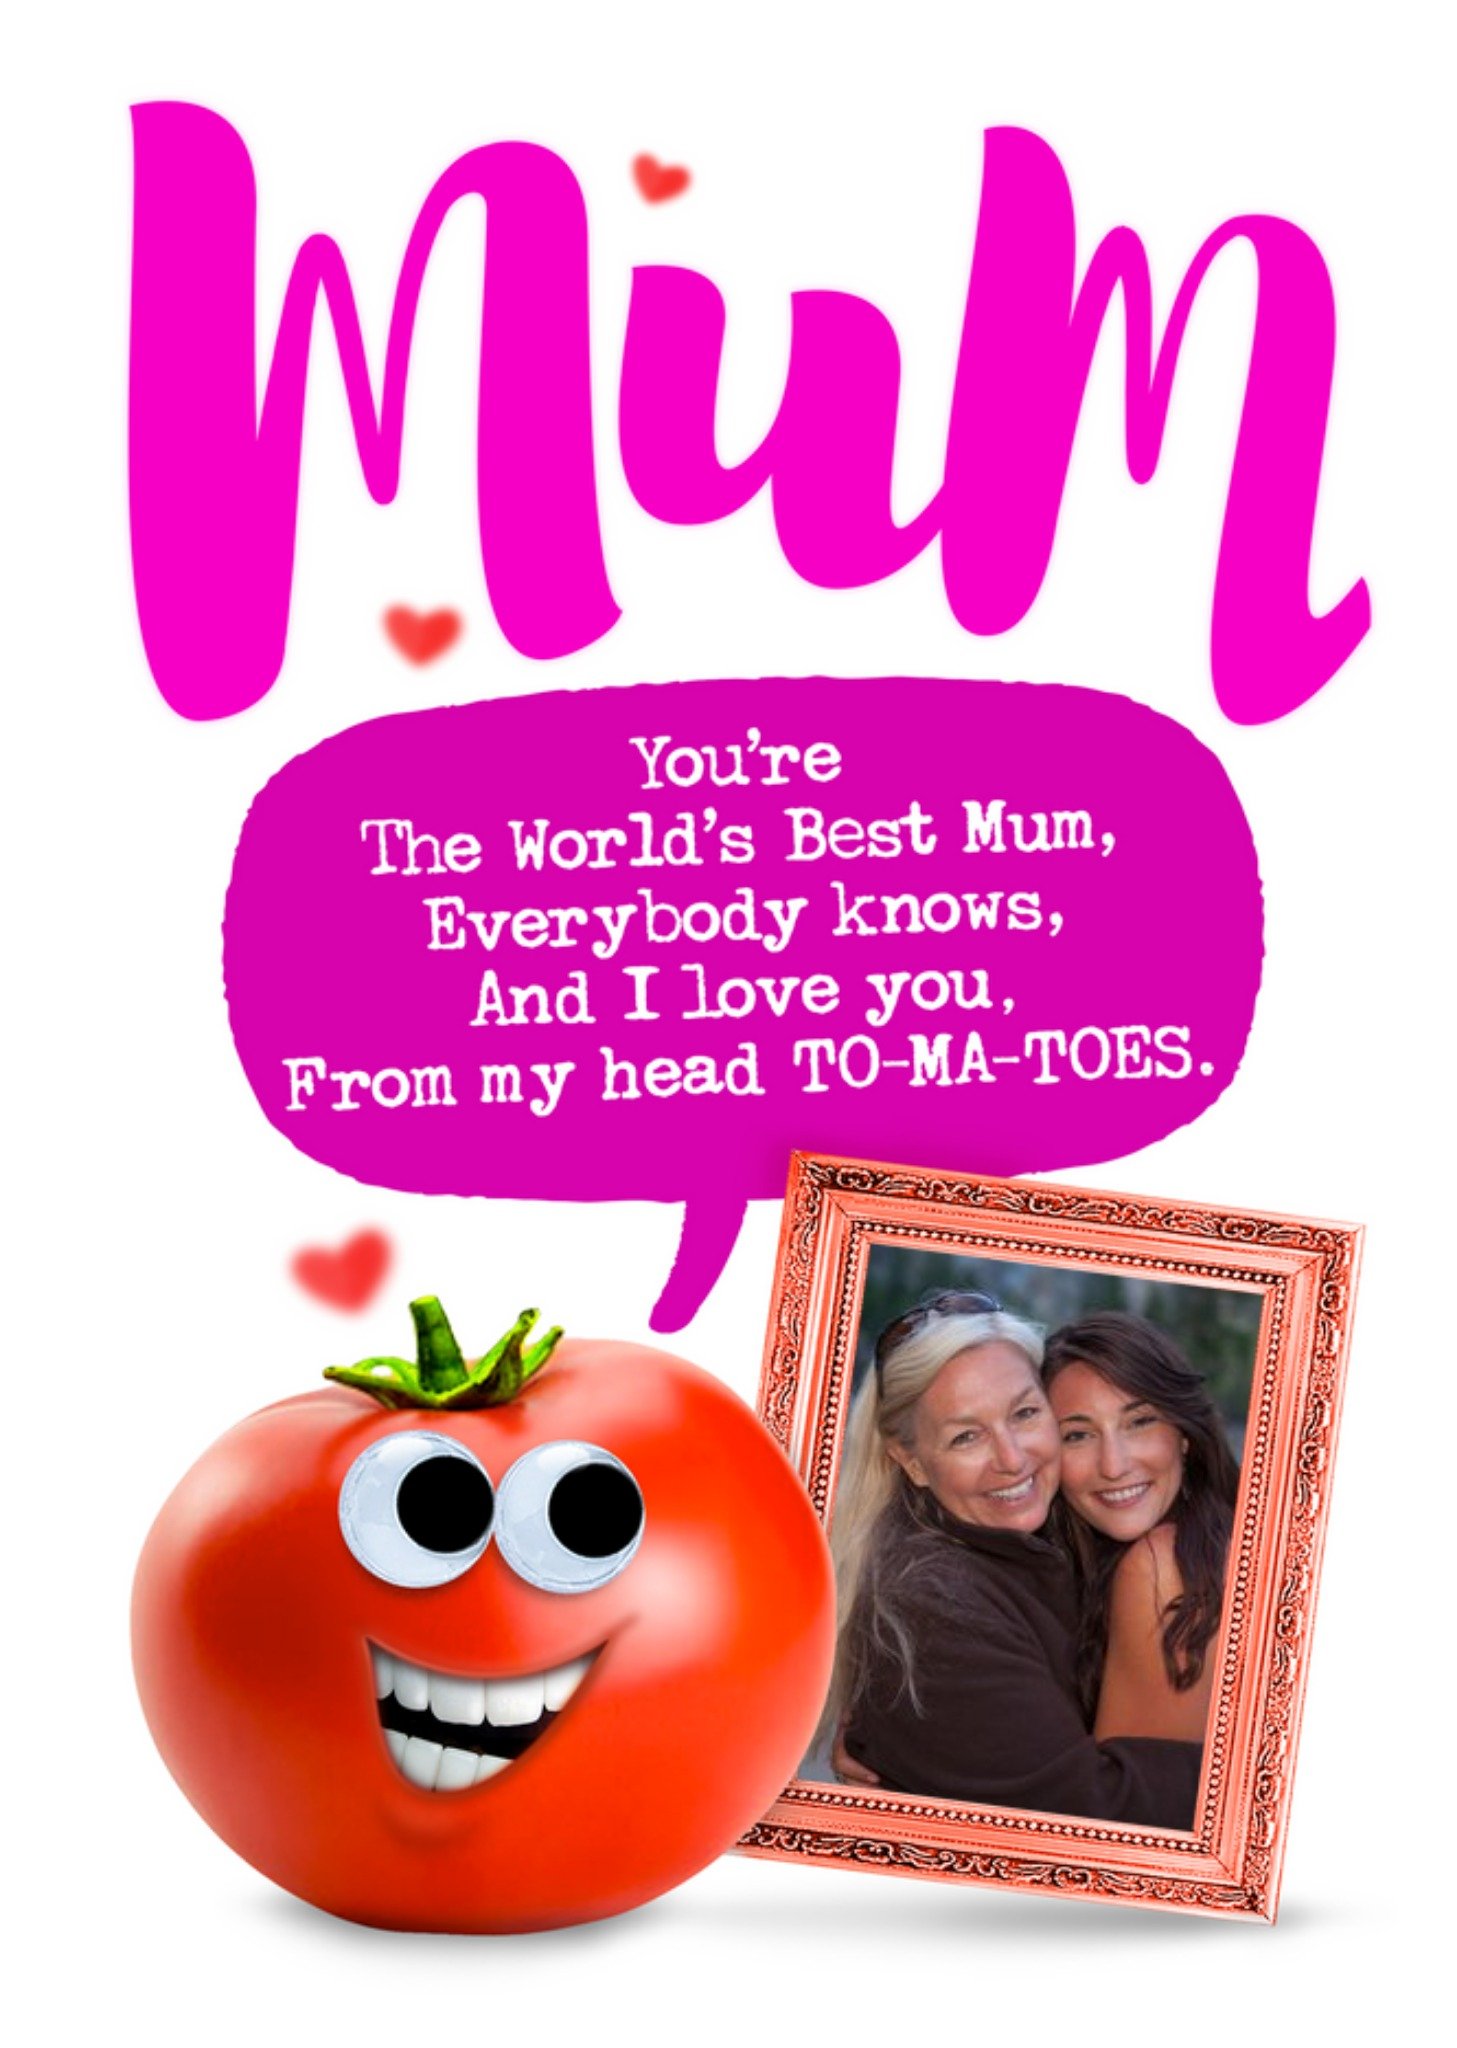 Moonpig Love You From Your Head Tomatoes Funny Pun Photo Upload Card, Large